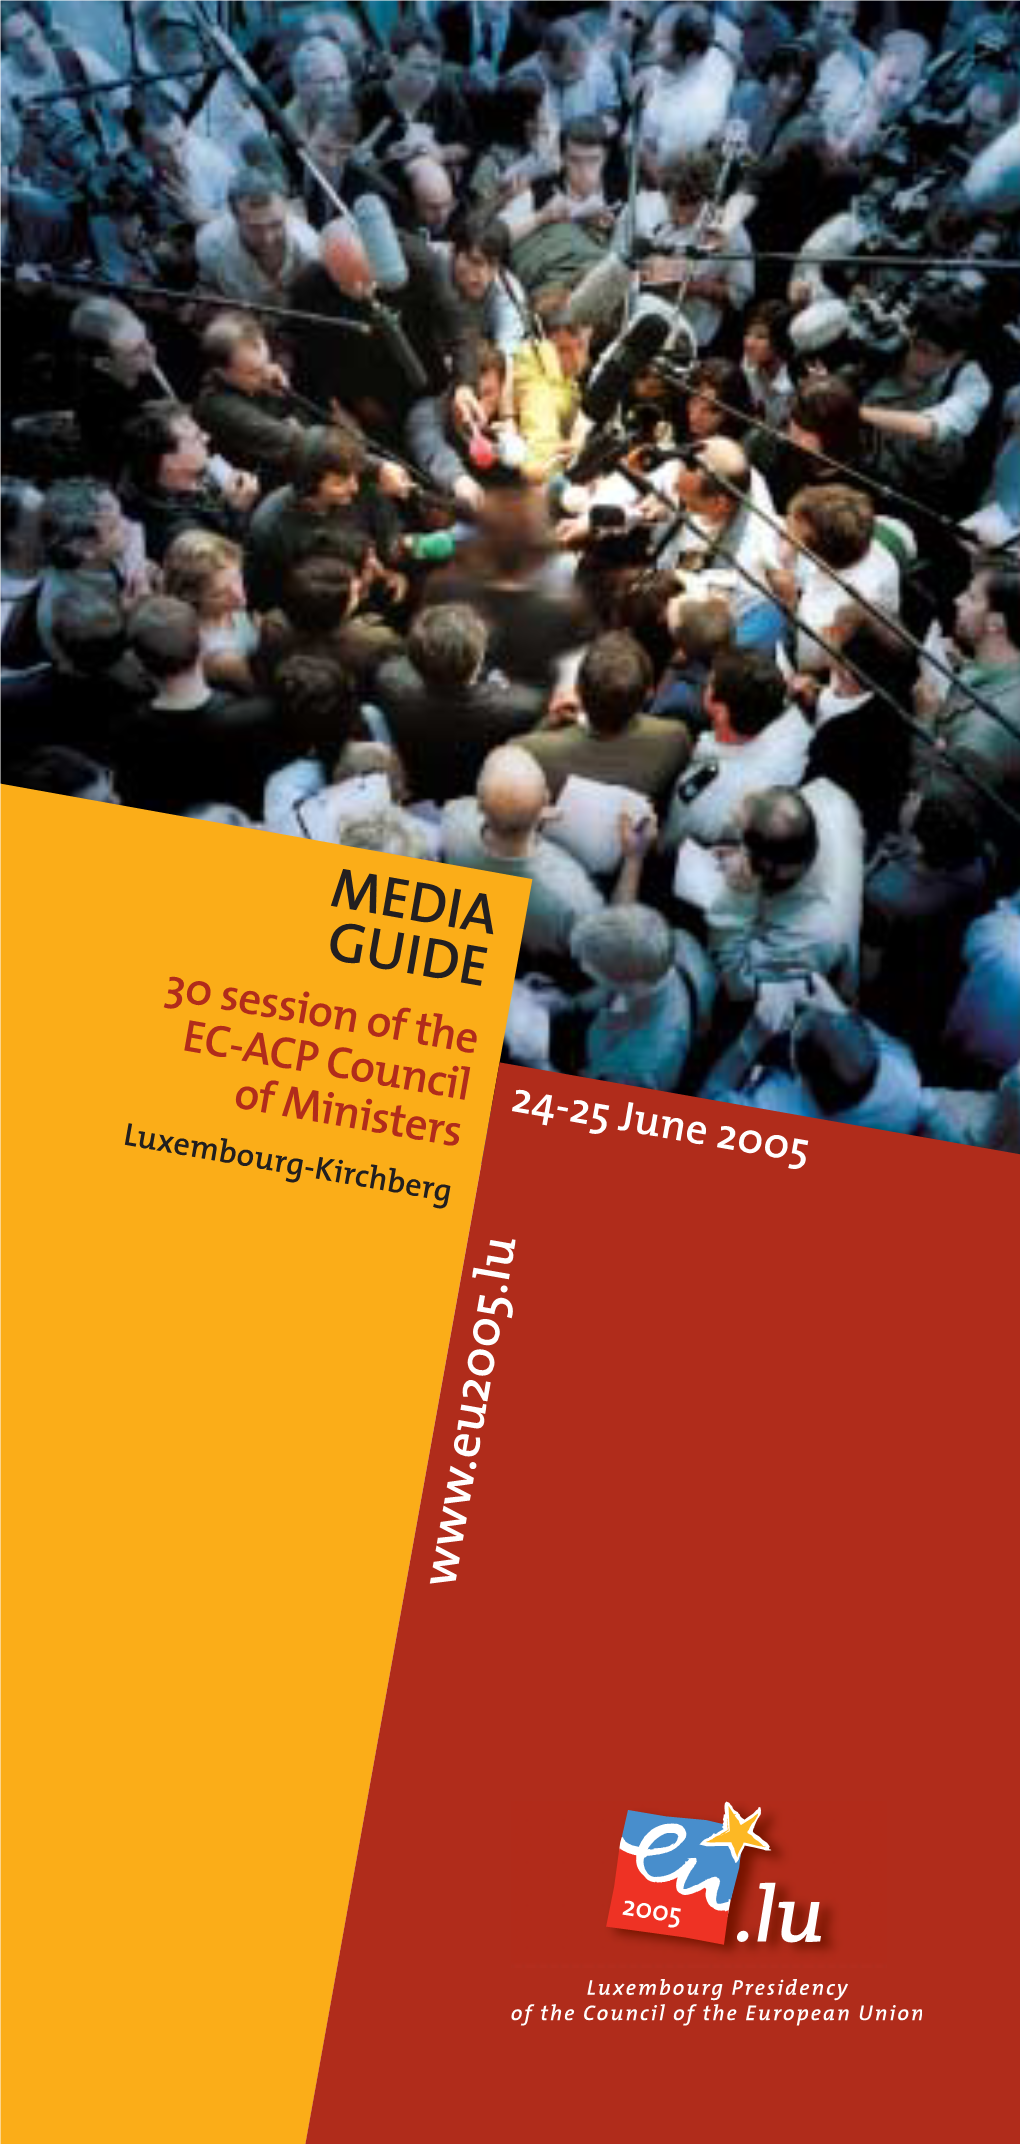 MEDIA GUIDE 30 Session of the EC-ACP Council of Ministers 24-25 June 2005 Luxembourg-Kir Chberg